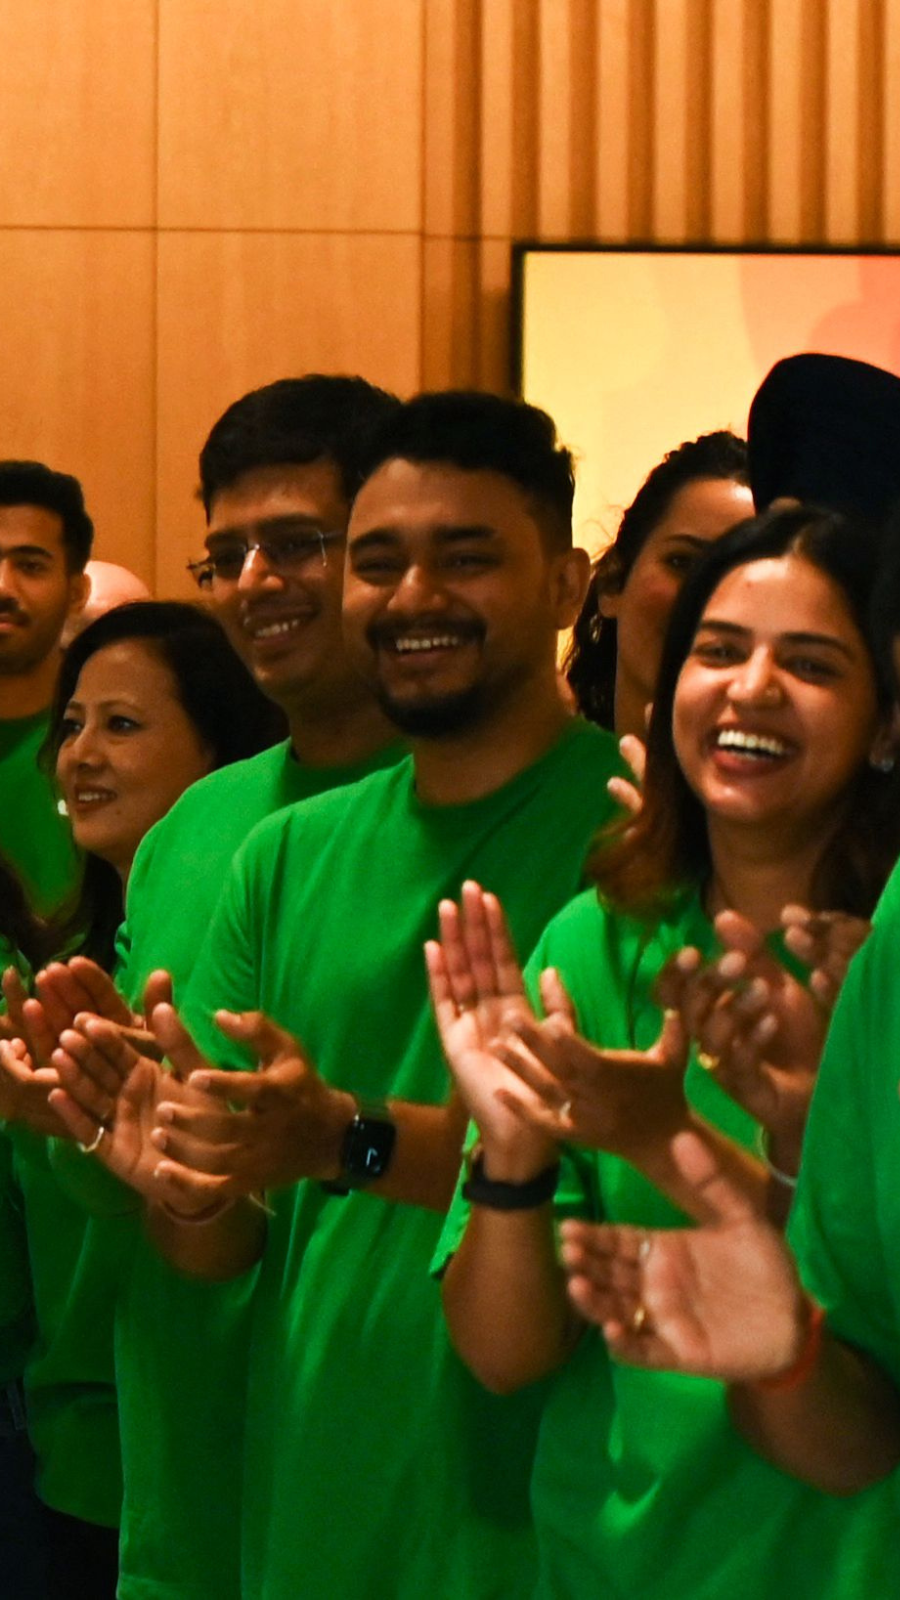 Apple Store employees earn Rs 1 lakh per month. This is why